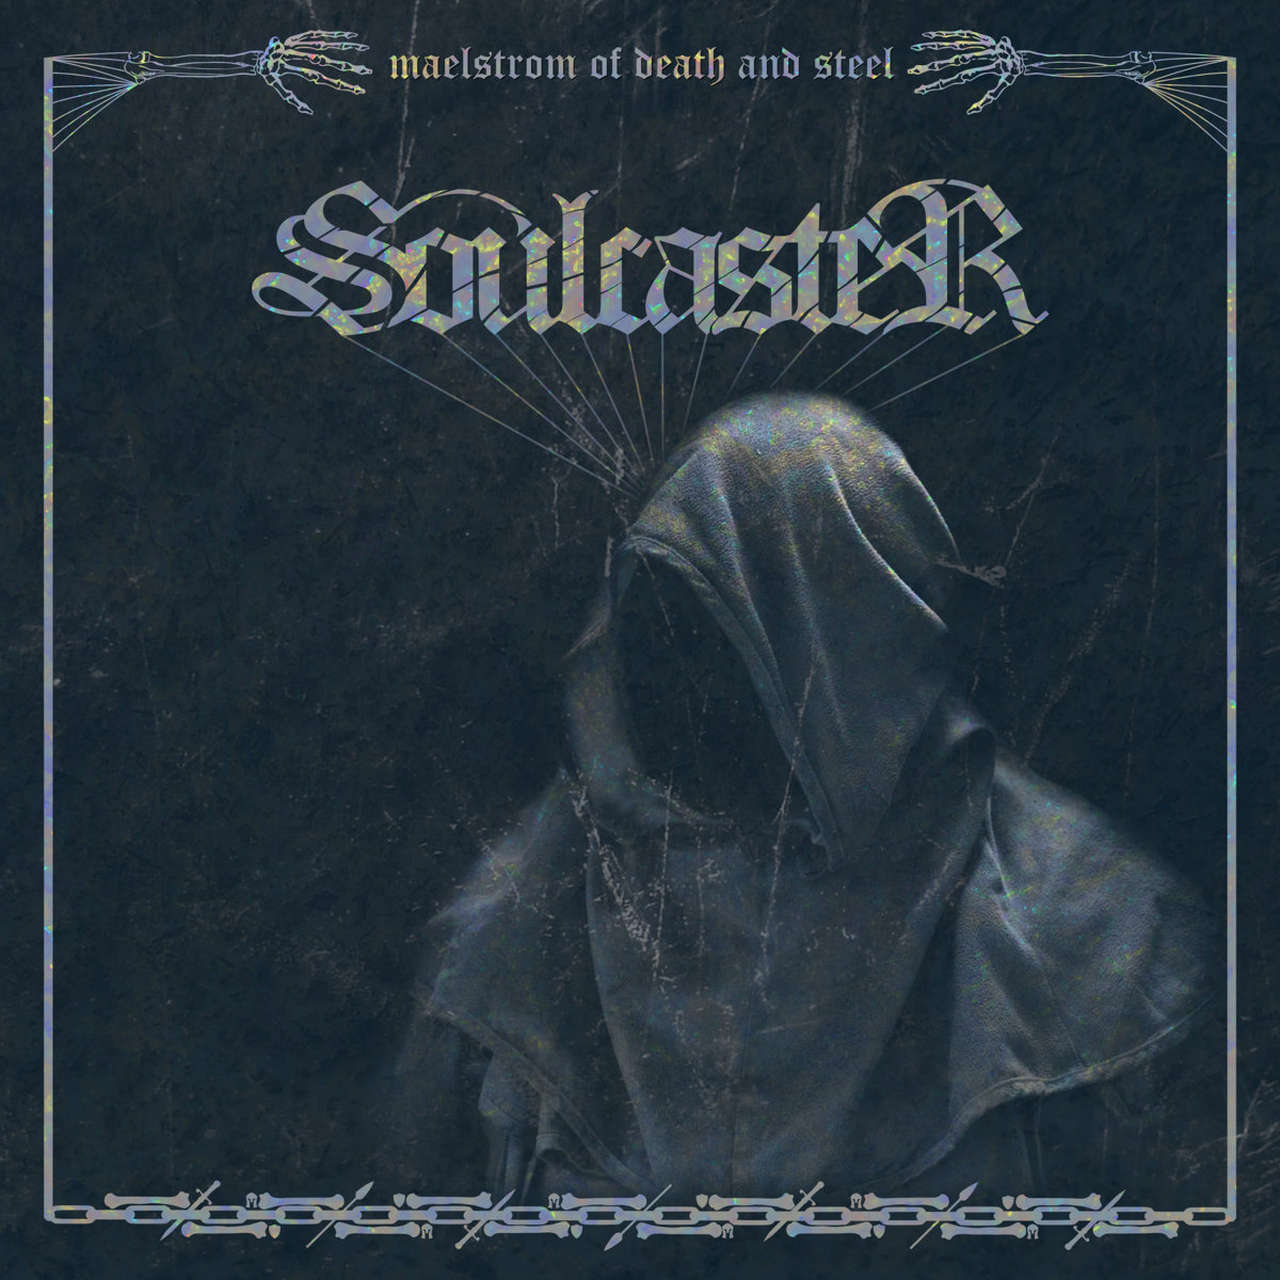 Soulcaster - Maelstrom of Death and Steel (CD)